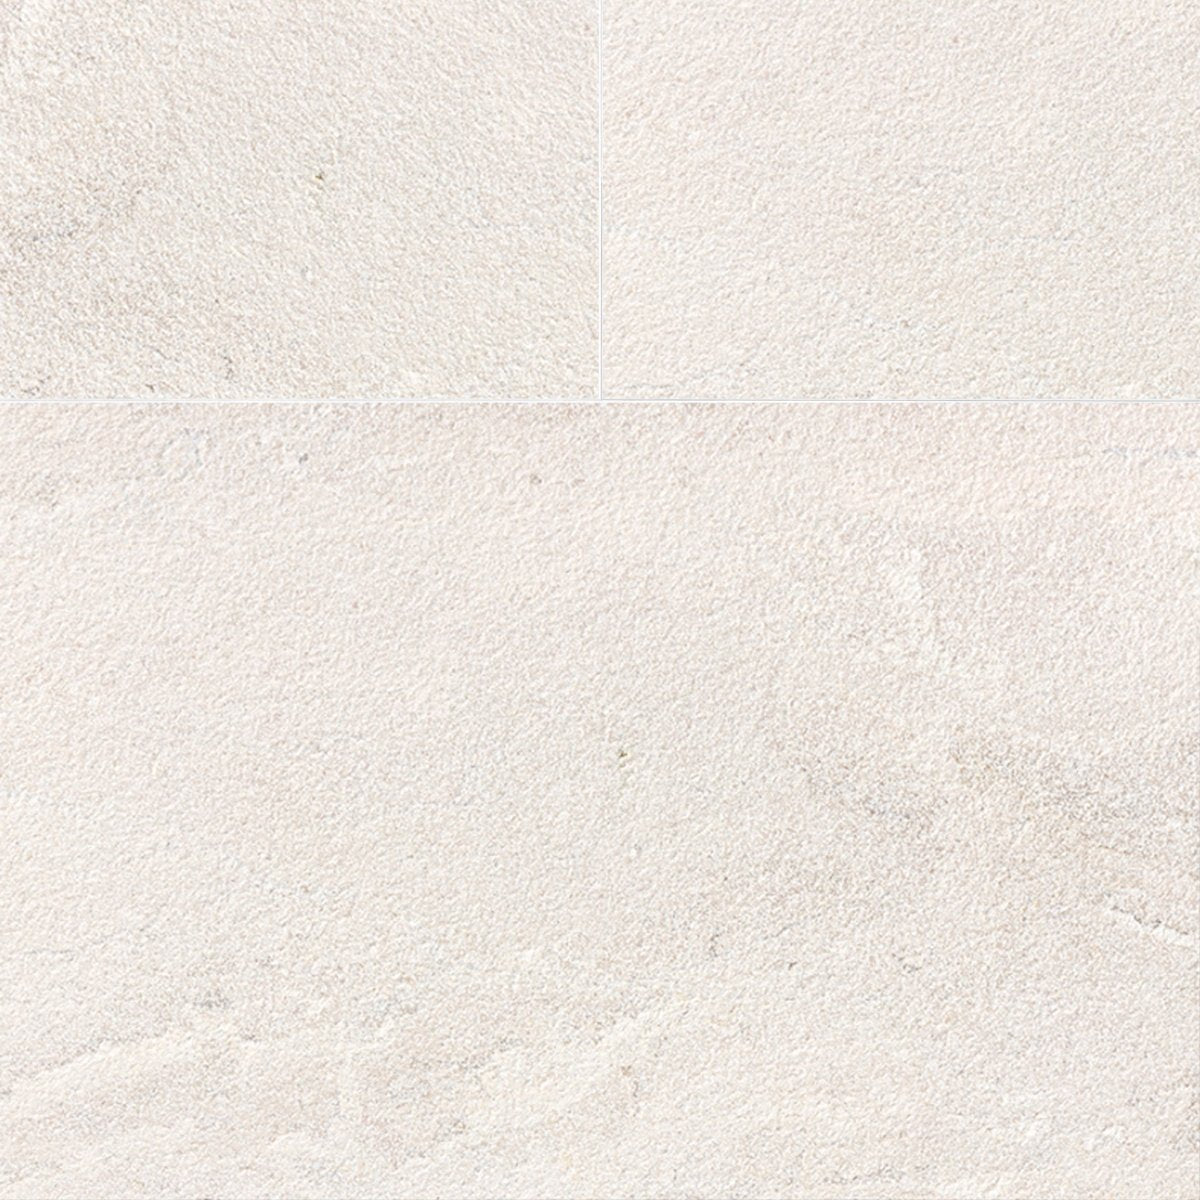 Palazzo Diano Royale Grain Textured Marble Field Tile 16''x24''x1/2''